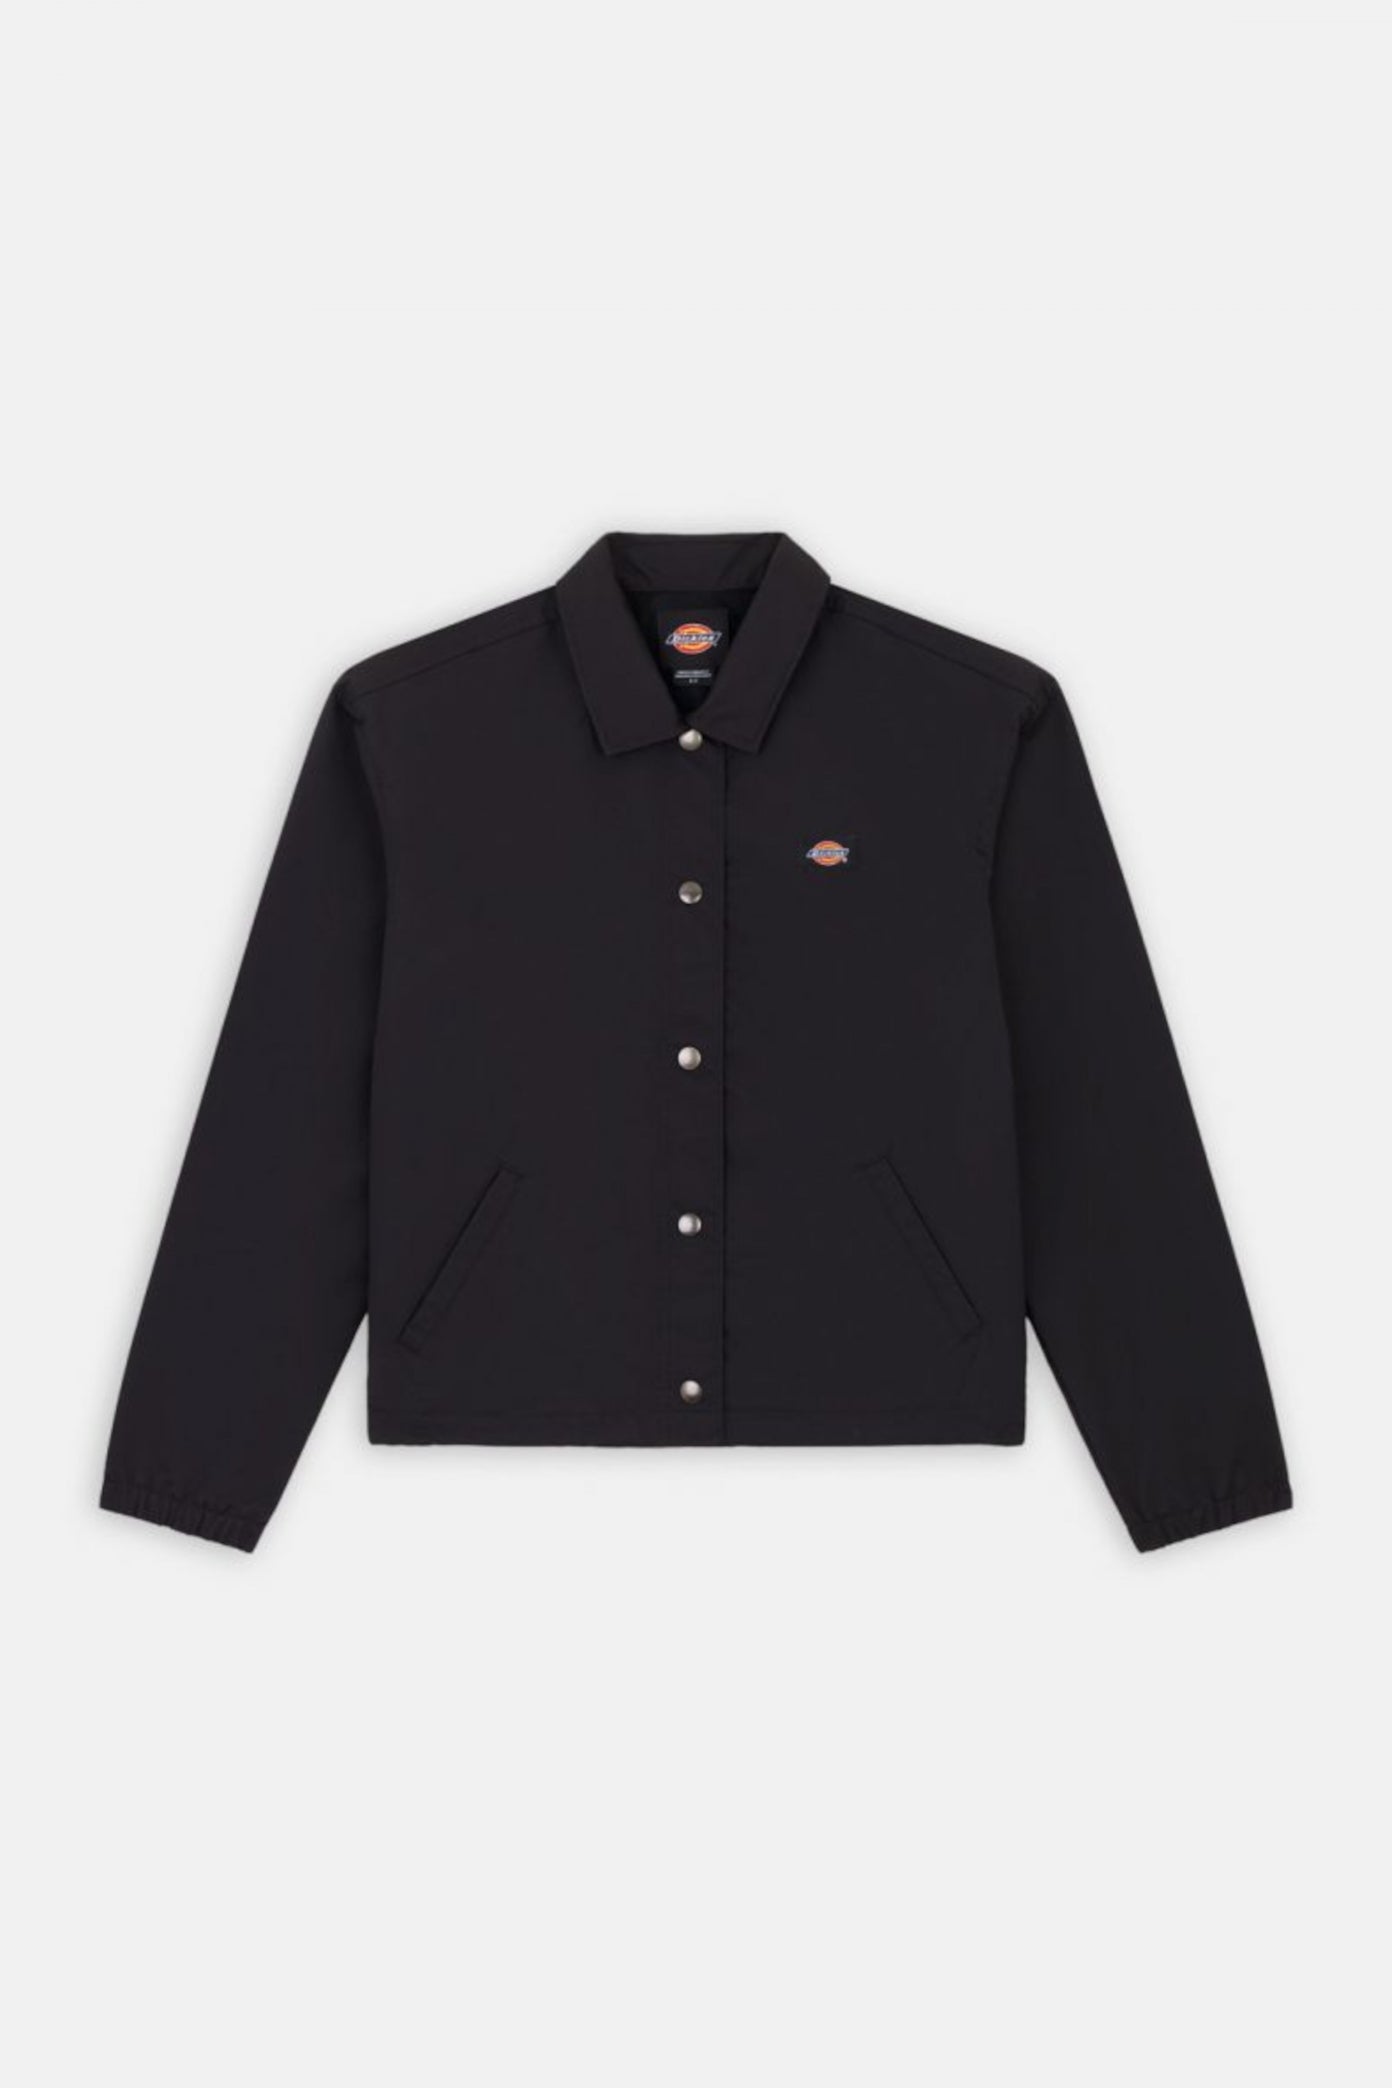 DICKIES OAKPORT CROPPED COACH en color NEGRO  (2)